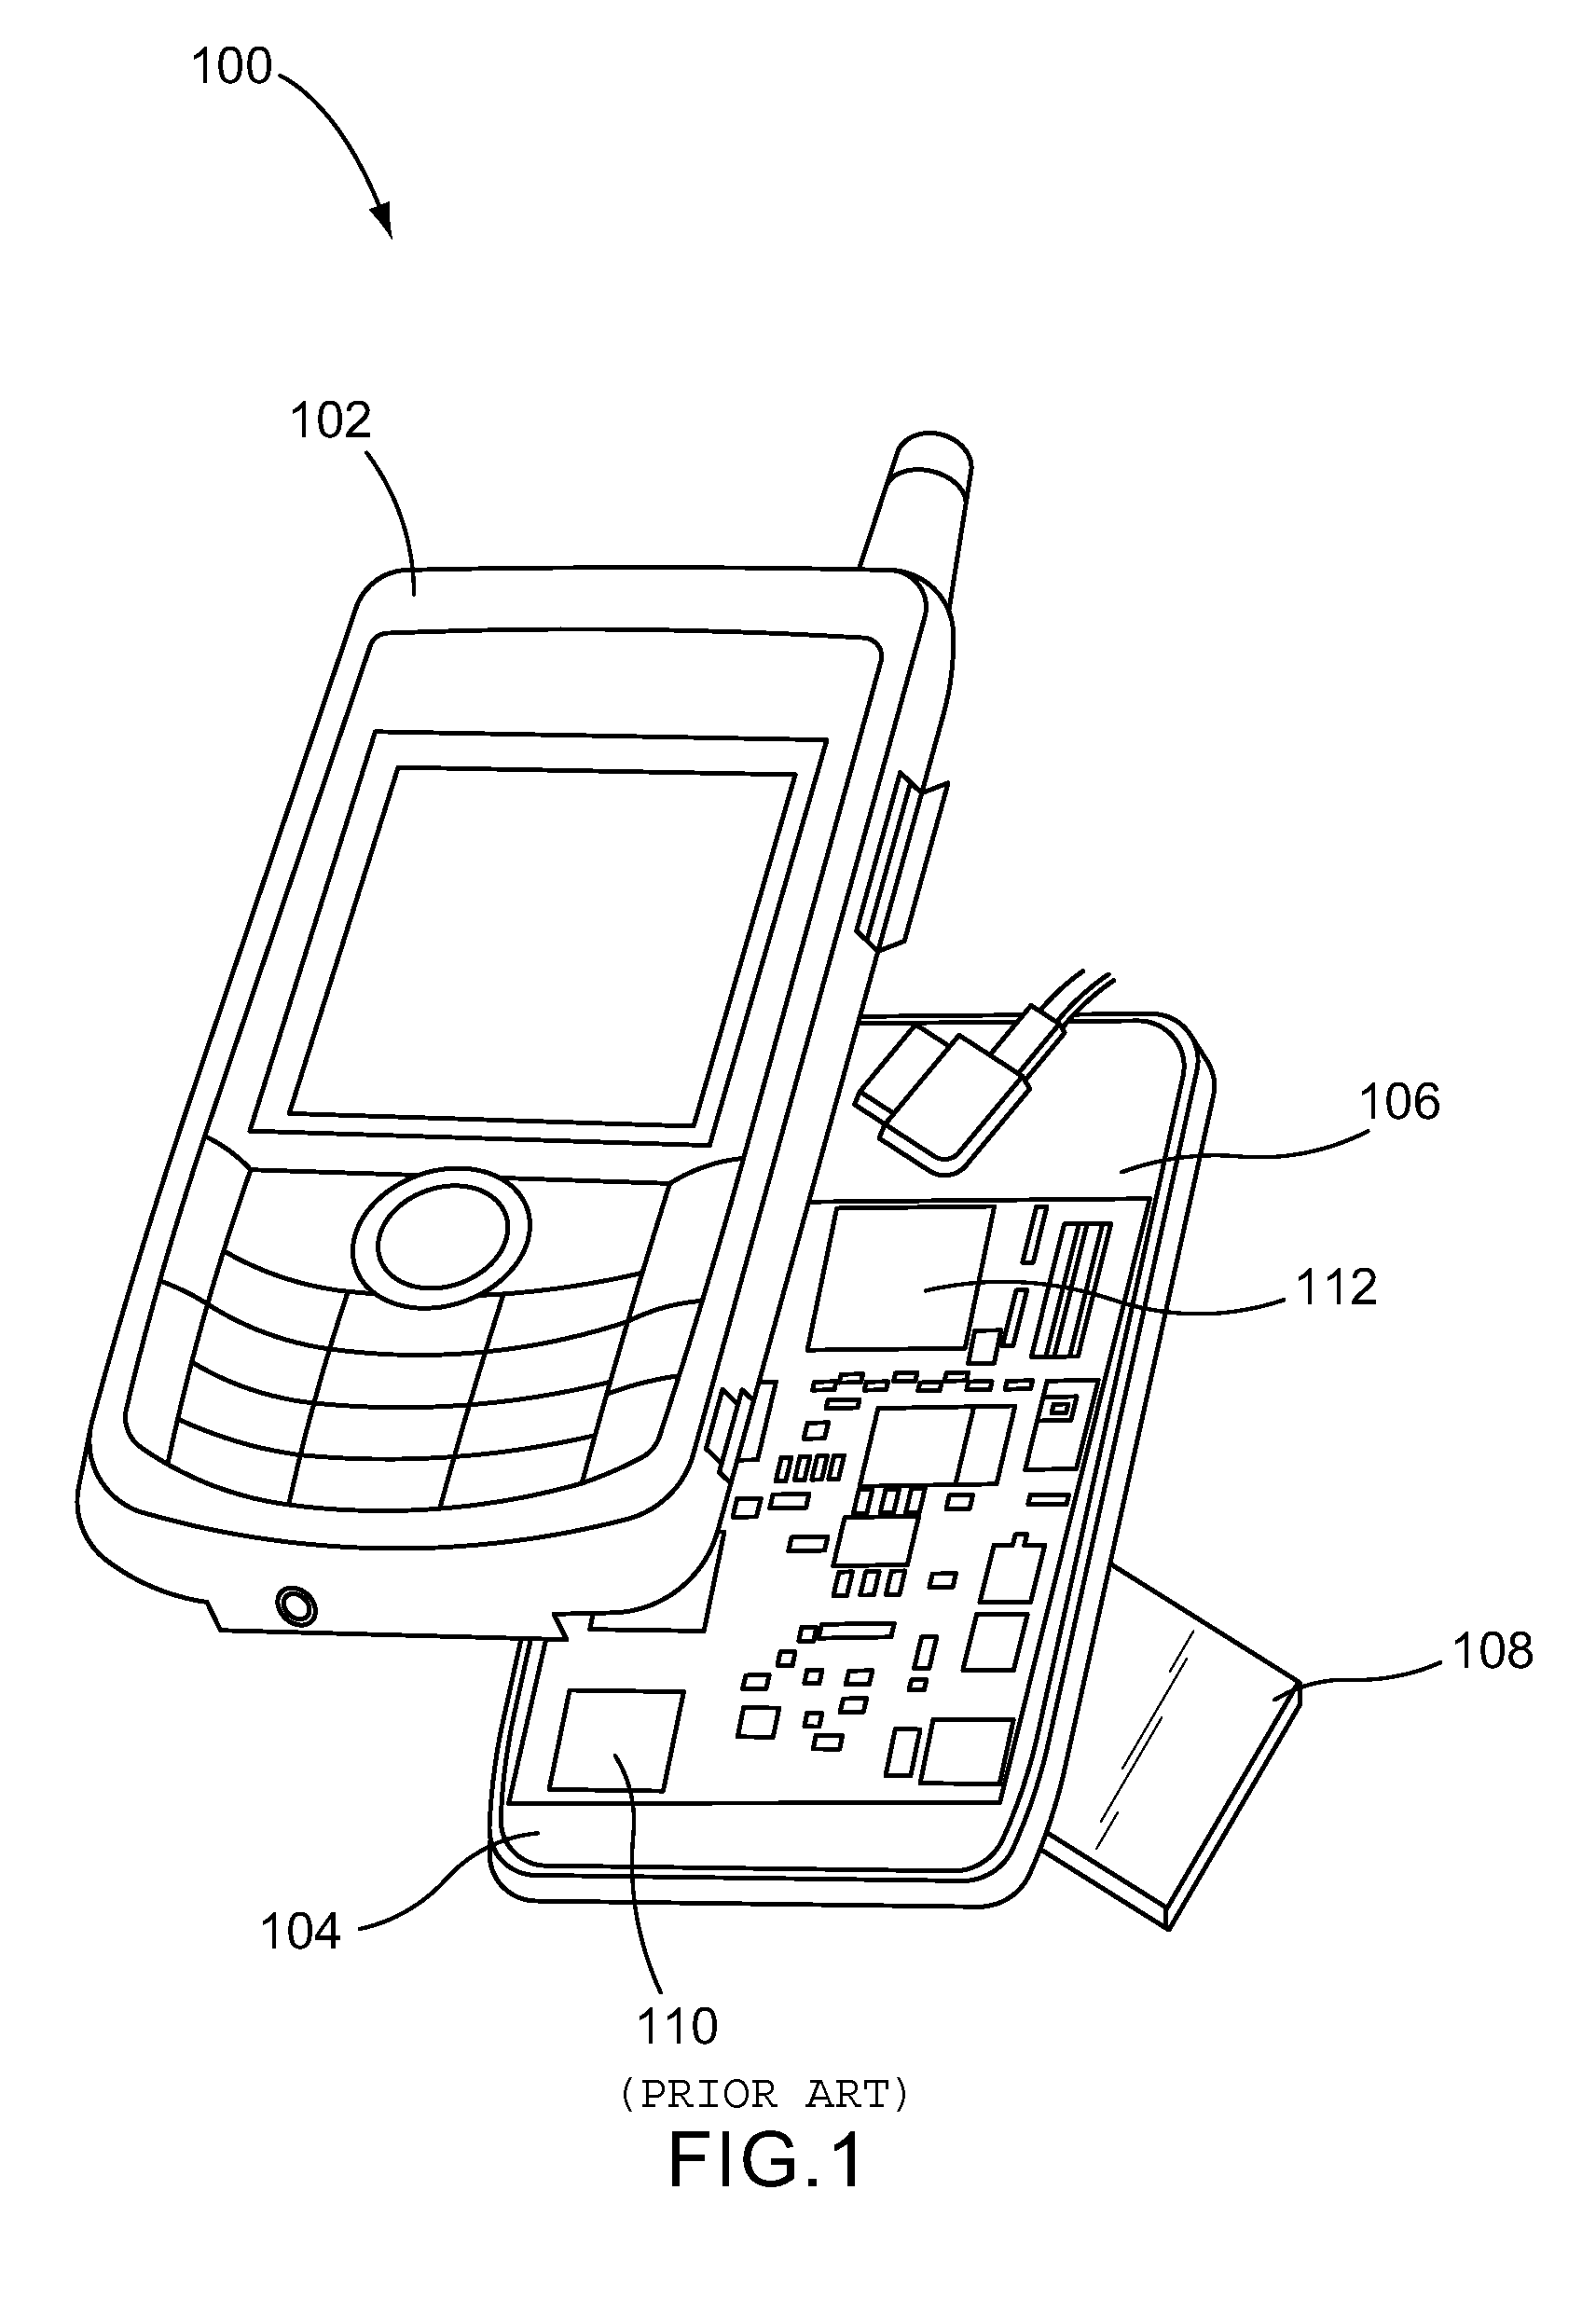 Systems structures and materials for electronic device cooling